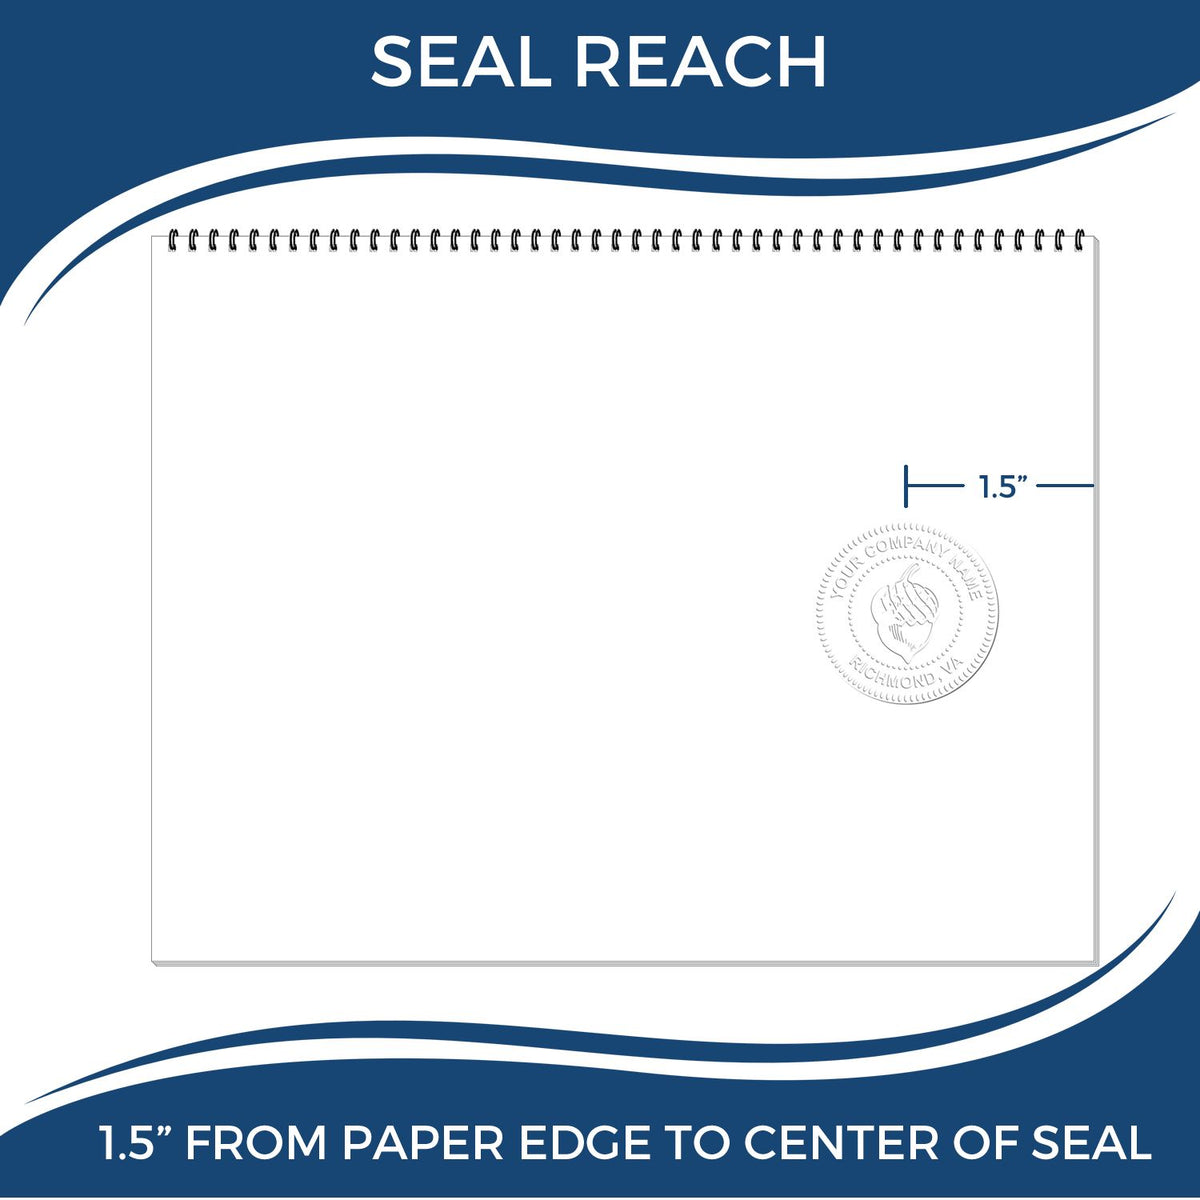 An infographic showing the seal reach which is represented by a ruler and a miniature seal image of the Gift Colorado Land Surveyor Seal